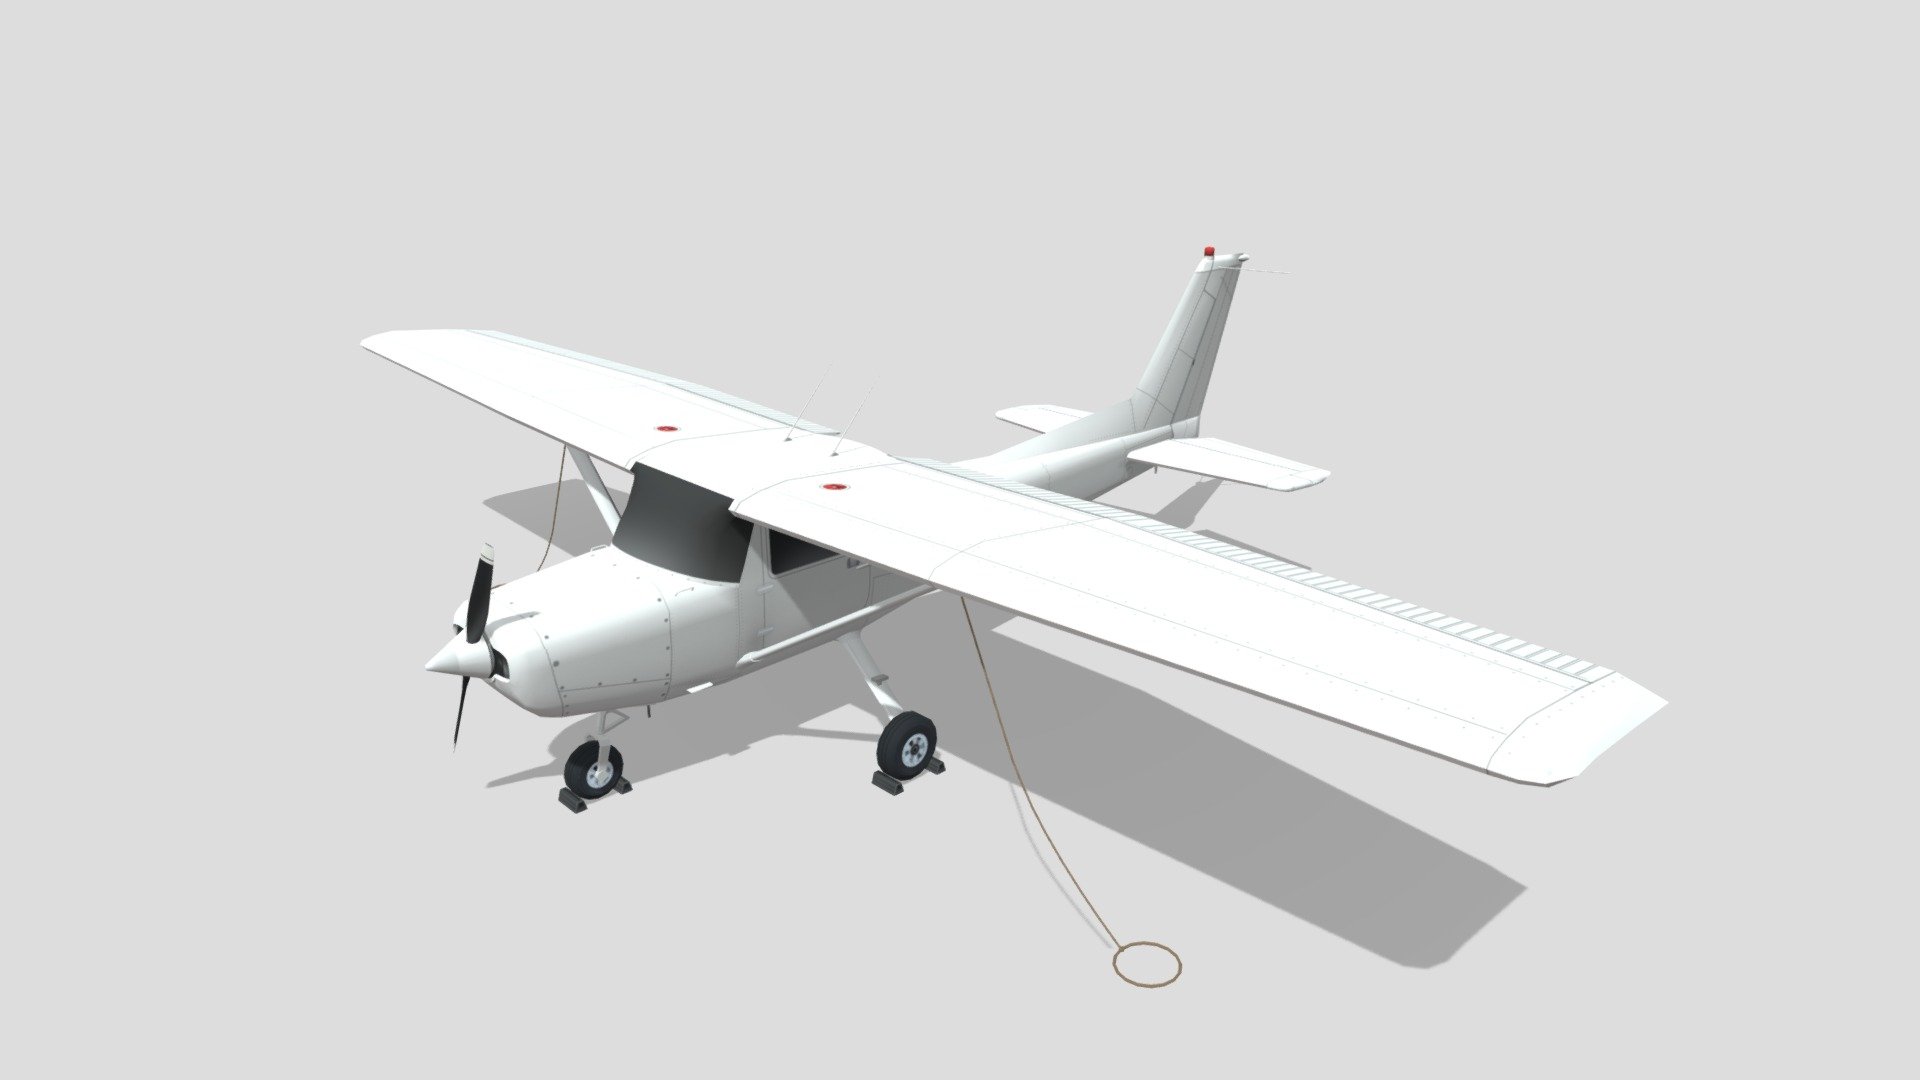 The Cessna 152 is an American two-seat, fixed-tricycle-gear, general aviation airplane, used primarily for flight training and personal use.

This is a meticulously crafted 3D low-poly model of a Cessna 152, optimized for minimal complexity with less than 5000 polygons. Despite its low polygon count, the model accurately captures the iconic design and aerodynamic features of the Cessna 152, making it ideal for real-time rendering in games or simulations.

The model comes with a blank layered texture, providing a clean slate for customization. This allows you to apply your own color schemes, decals, or airline branding. The layered structure of the texture file offers flexibility in modifying different parts of the aircraft separately, such as the fuselage, wings, engines, and tail.

In summary, this Cessna 152 low-poly model is a perfect blend of simplicity, accuracy, and customizability, making it a versatile asset for any 3D project 3d model